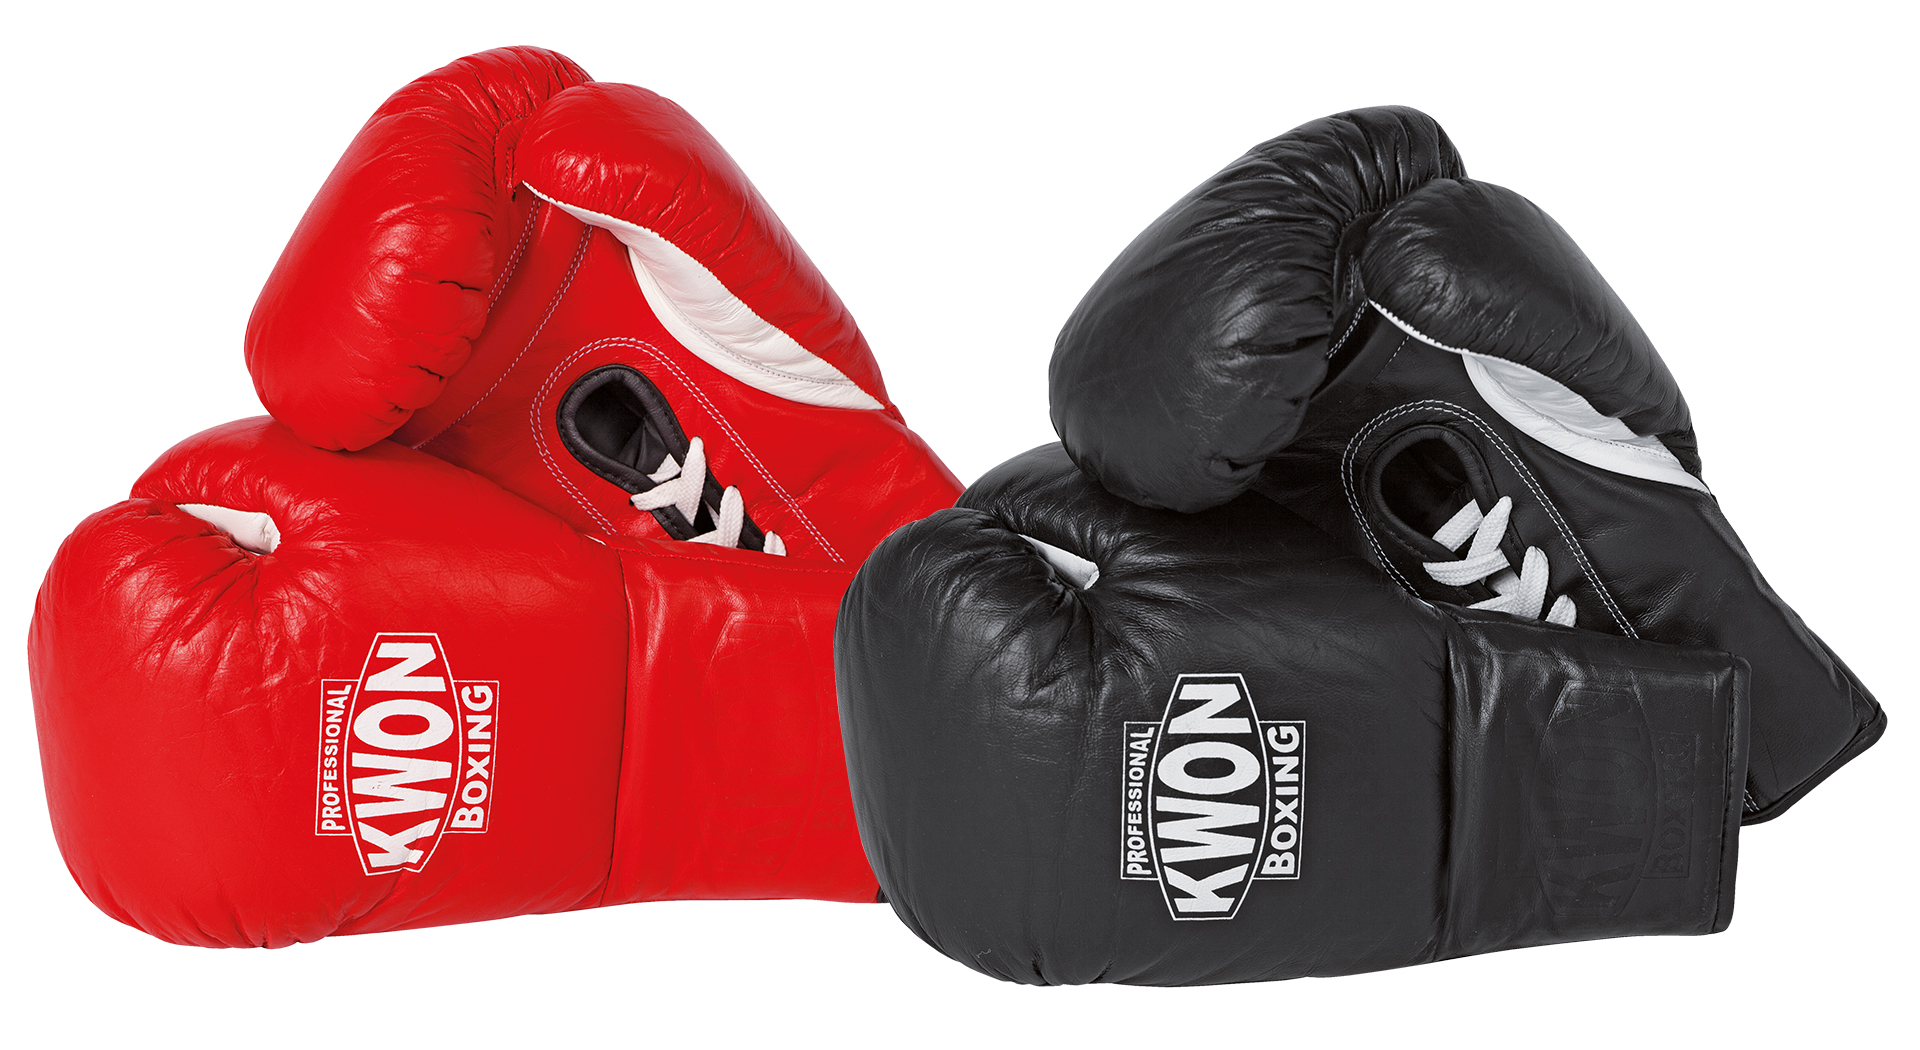 KWON PROFESSIONAL for competitions BOXING Gloves Leather with laces